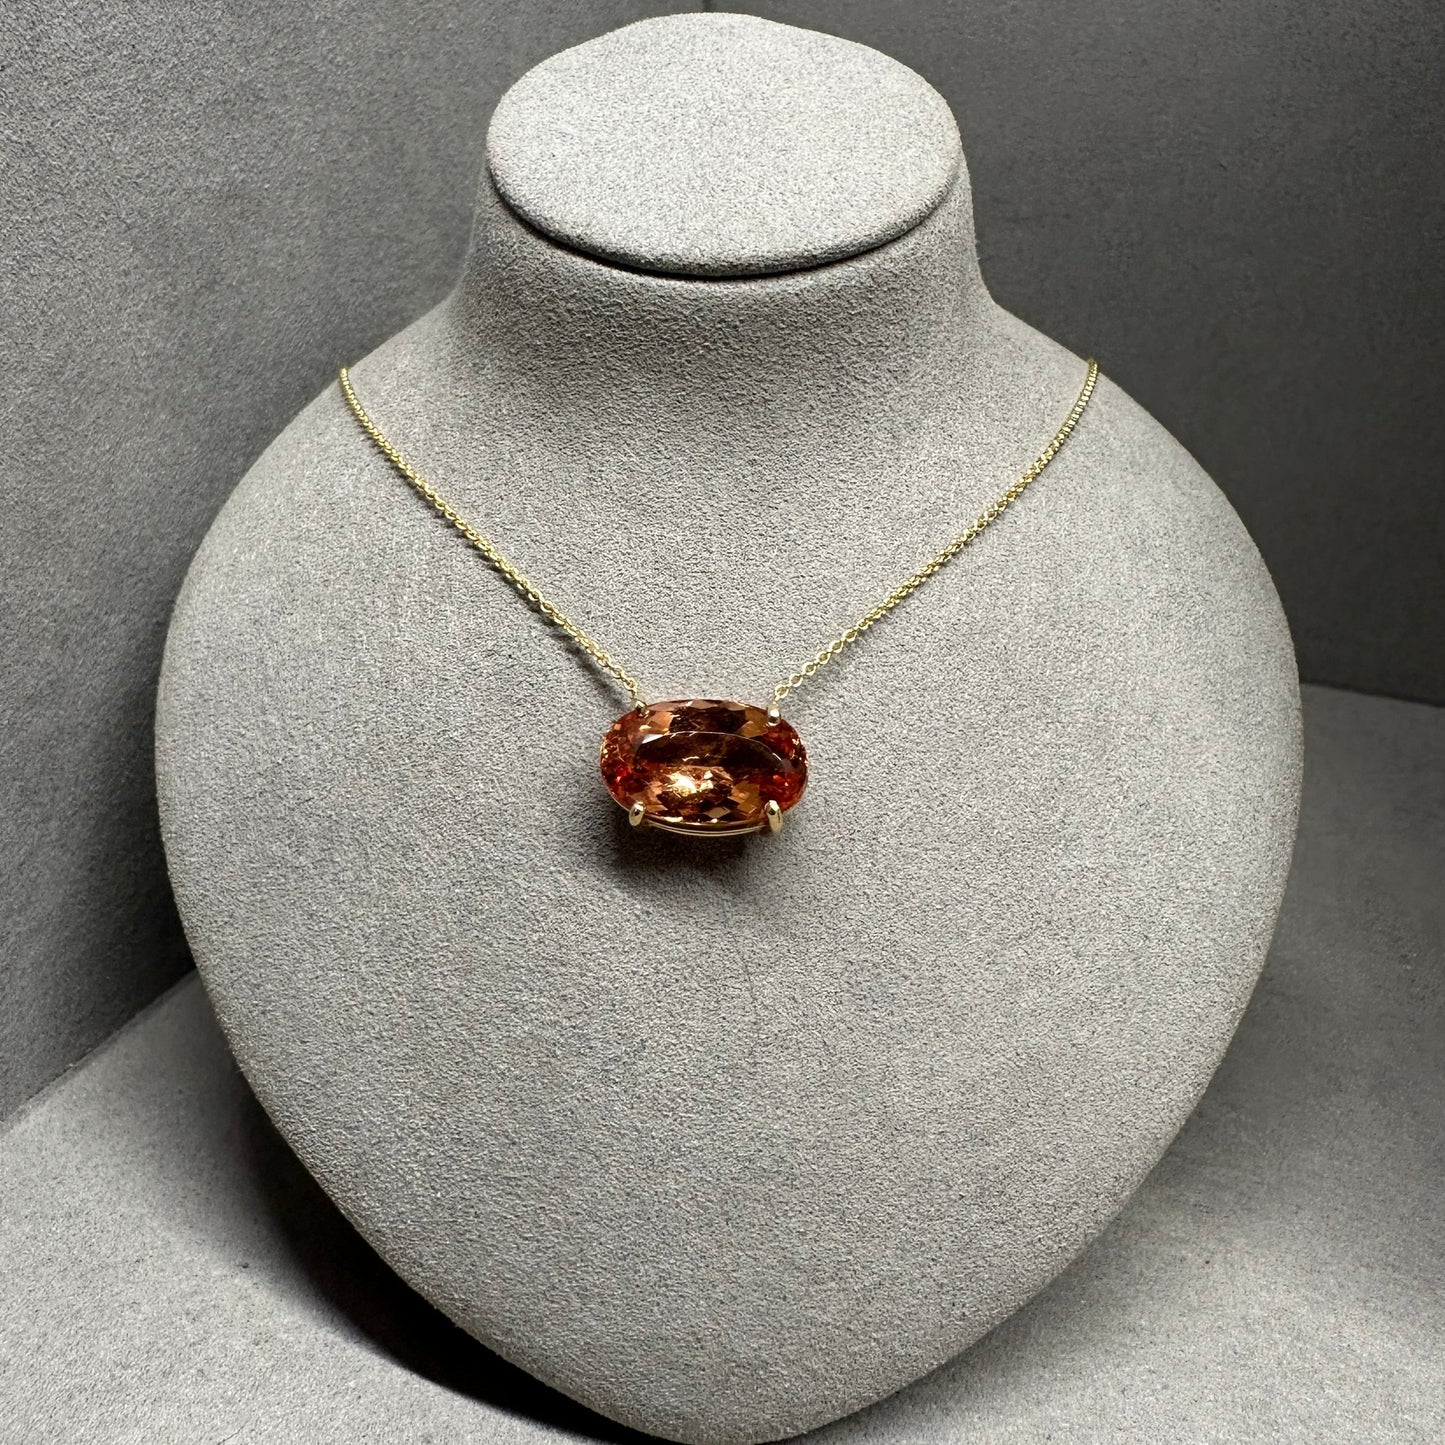 10ct Imperial Topaz Solitaire Necklace